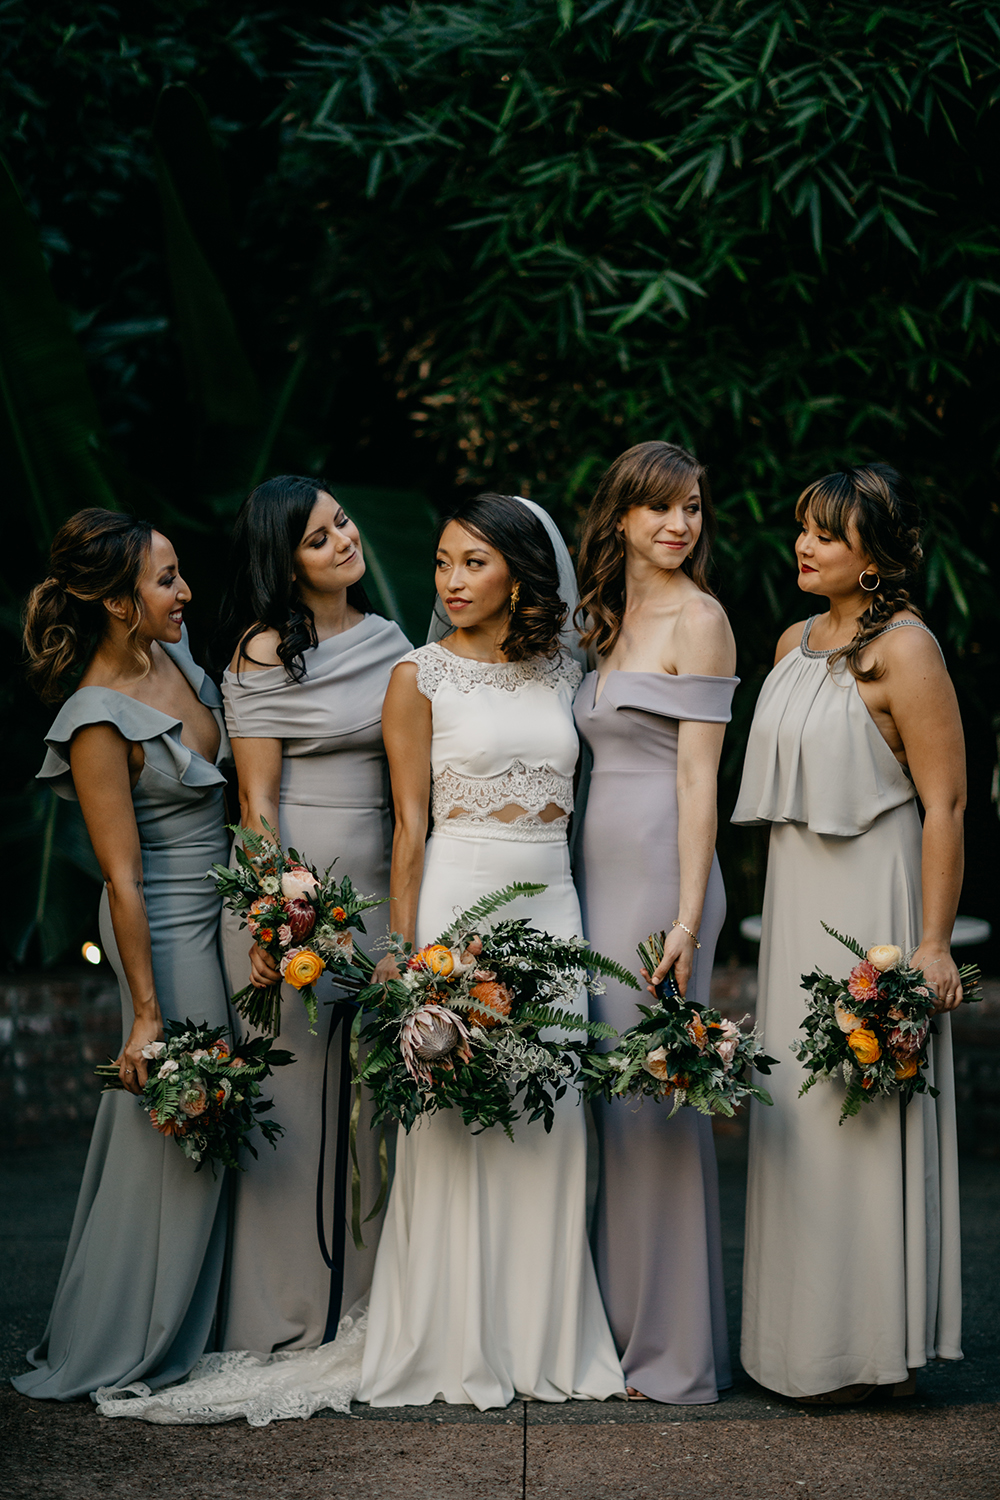 Terry + Nancy Millwick Wedding / Modern Los Angeles Wedding / LA Wedding / Moody Photography / Moody Wedding / DTLA Wedding / Millwick / Rachel Gulotta Photography / Lucky Day Events Co.